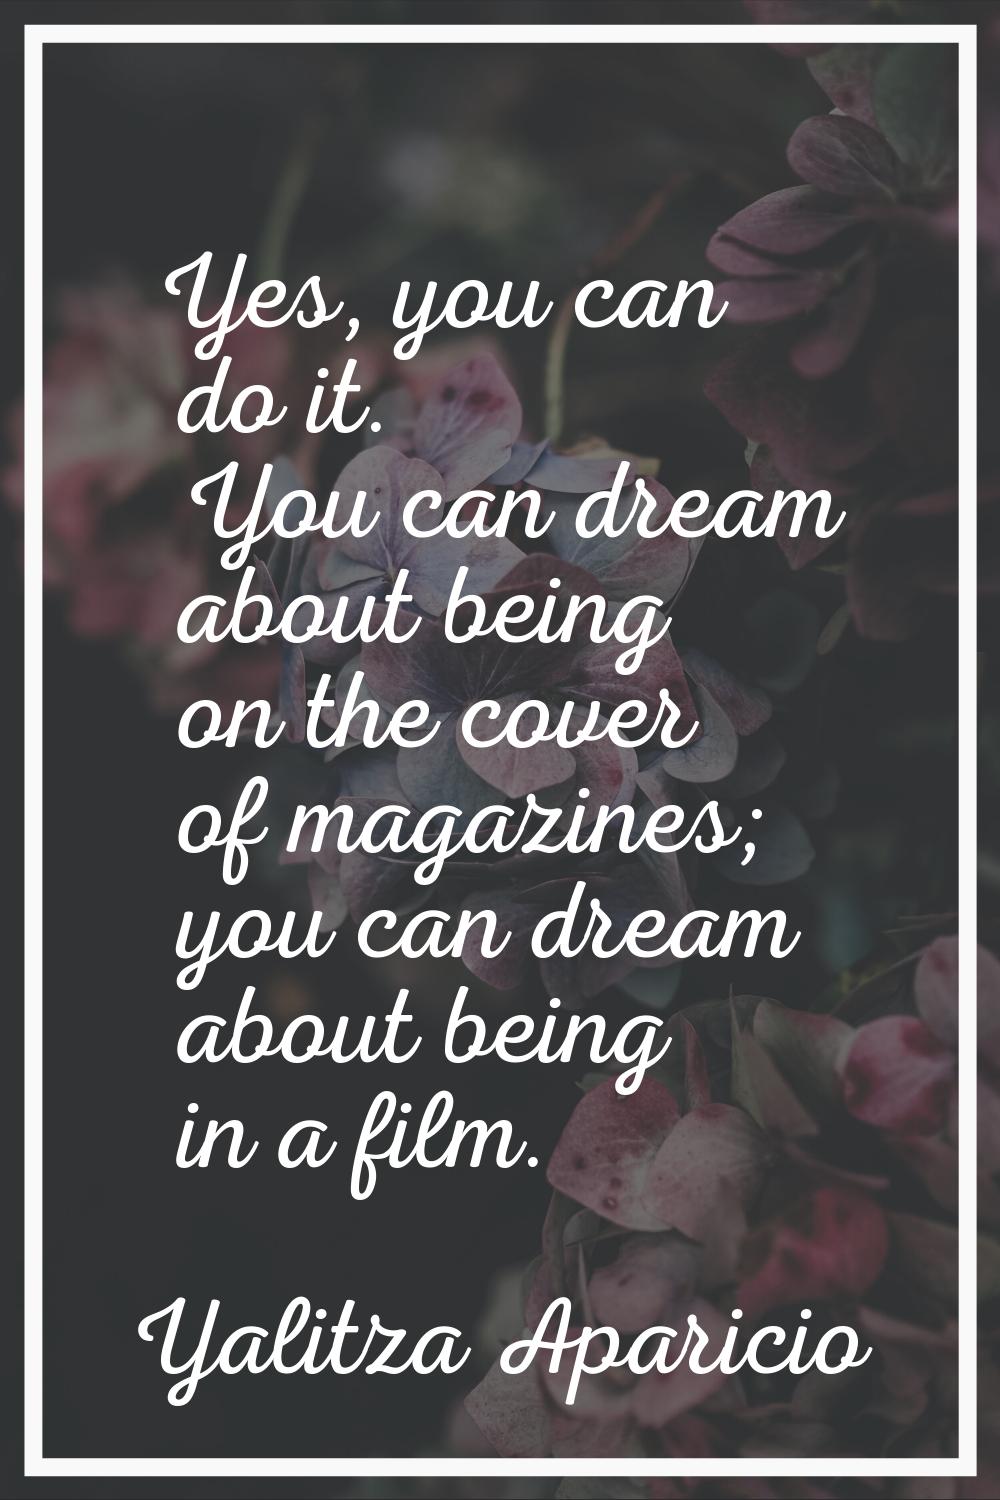 Yes, you can do it. You can dream about being on the cover of magazines; you can dream about being 